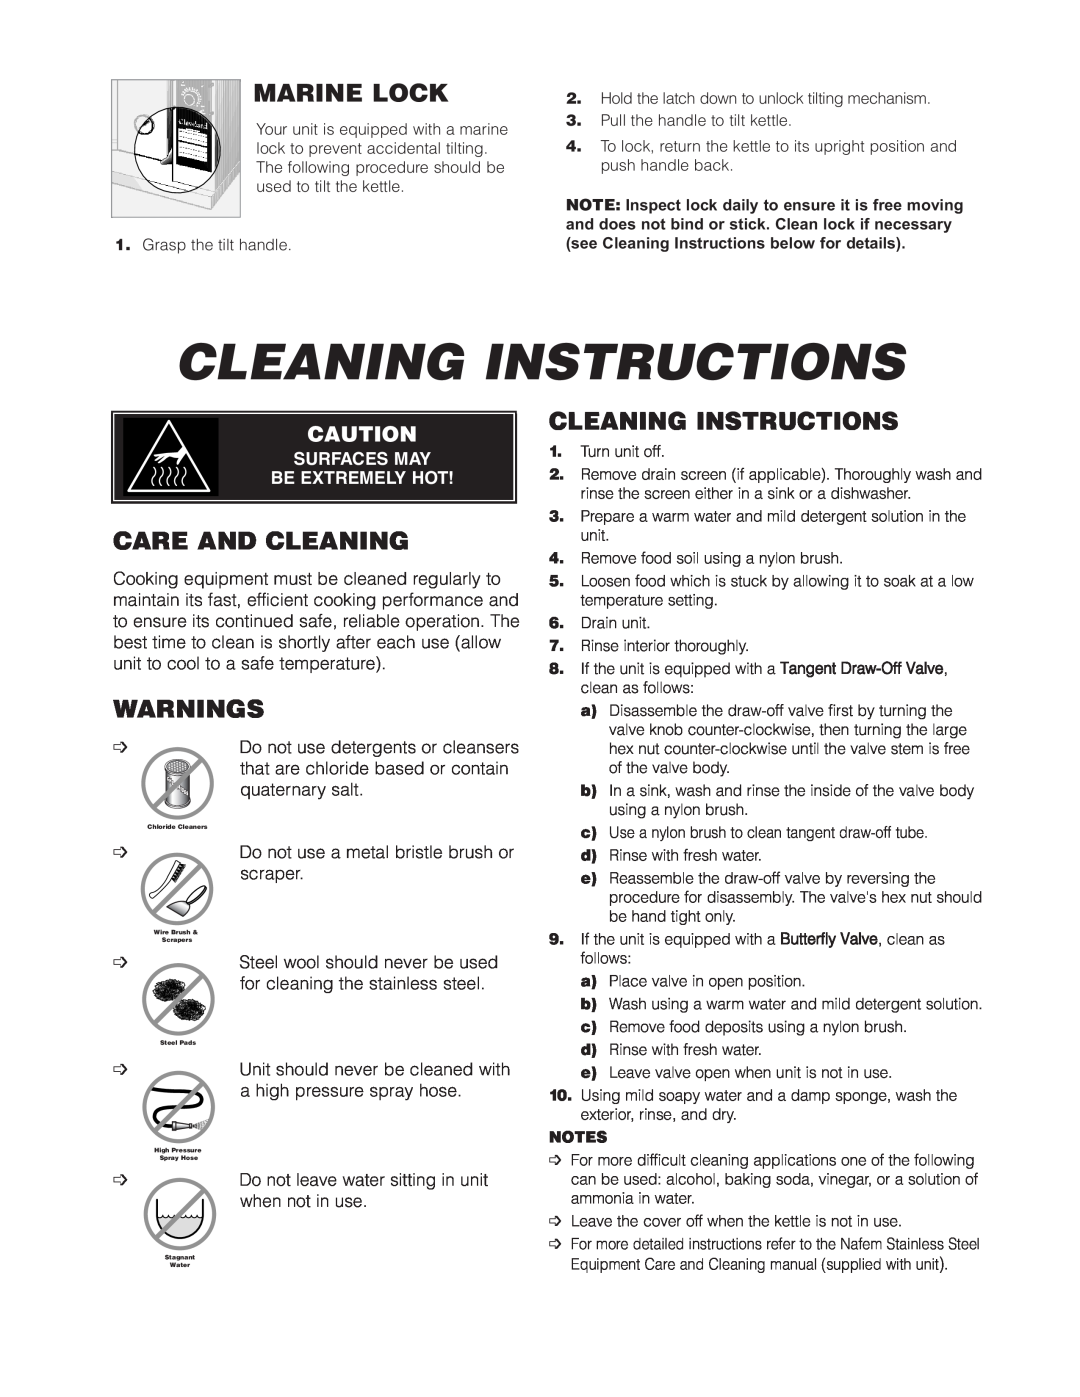 Cleveland Range KGT-6-T Cleaning Instructions, Marine Lock, Care And Cleaning, Warnings, Surfaces May Be Extremely Hot 